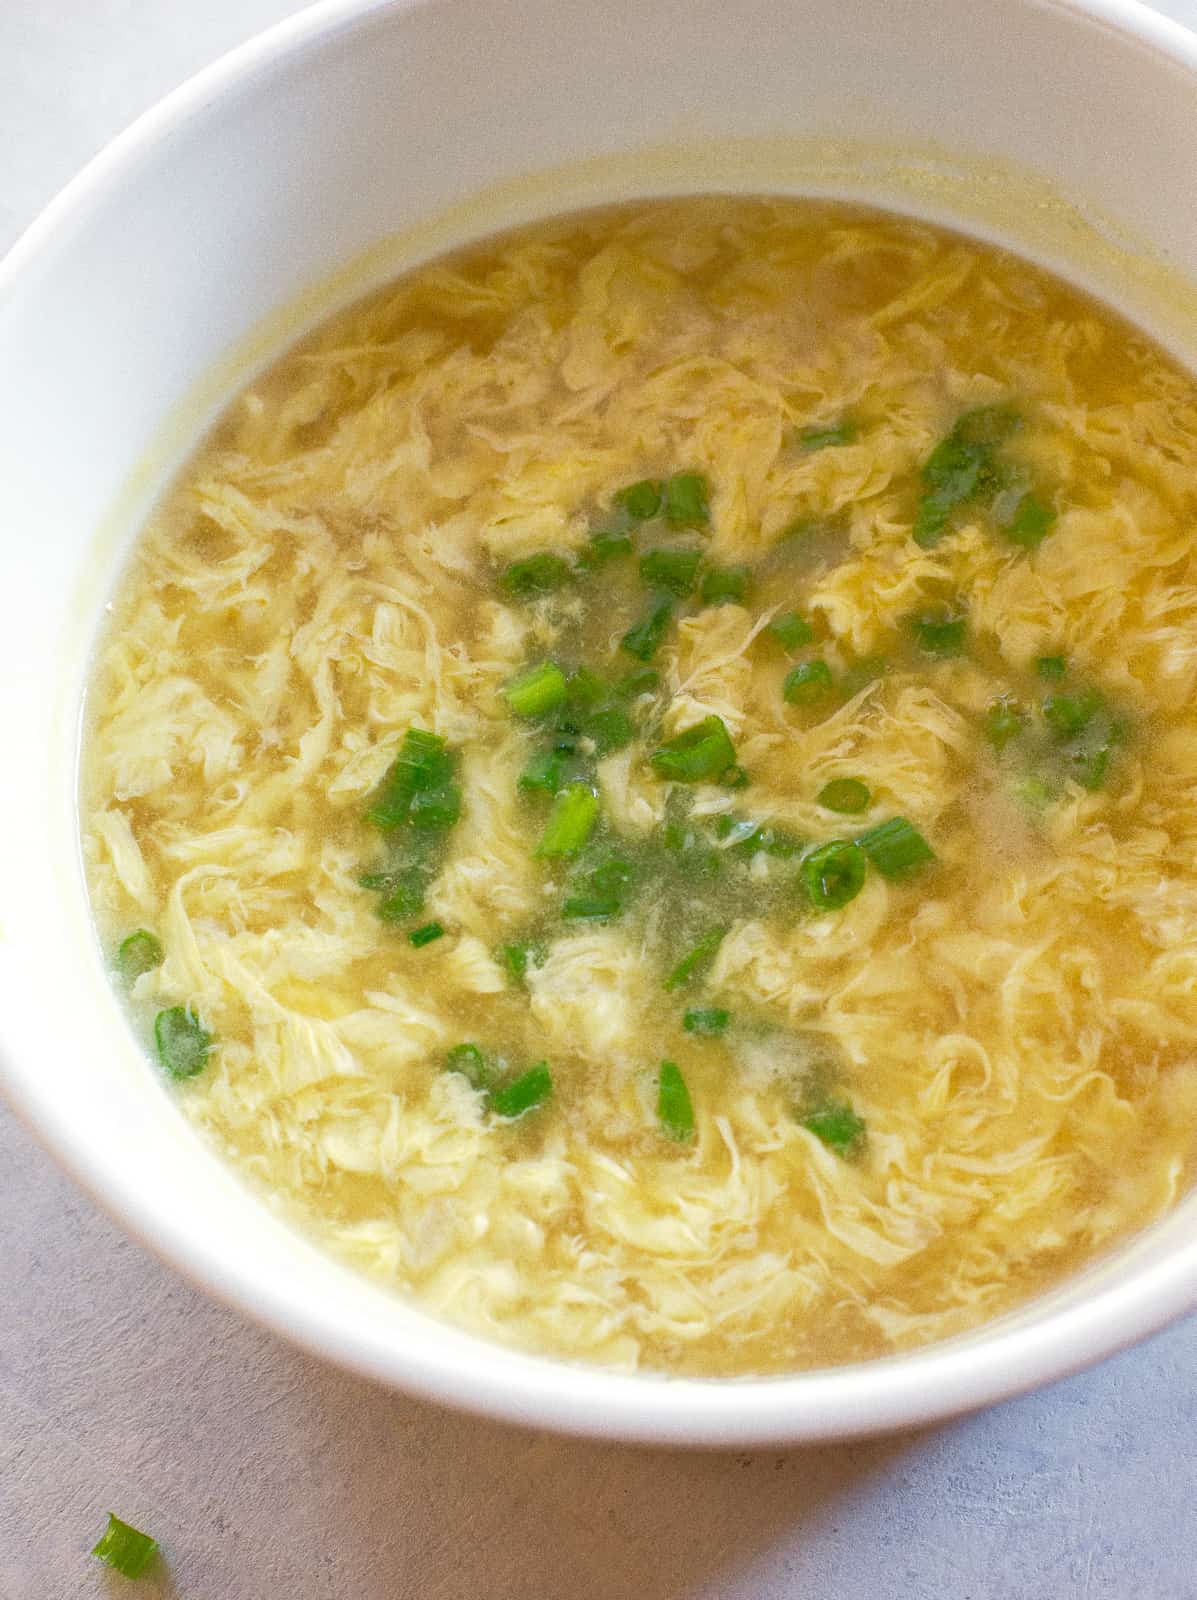 https://www.the-girl-who-ate-everything.com/wp-content/uploads/2019/01/egg-drop-soup-8.jpg